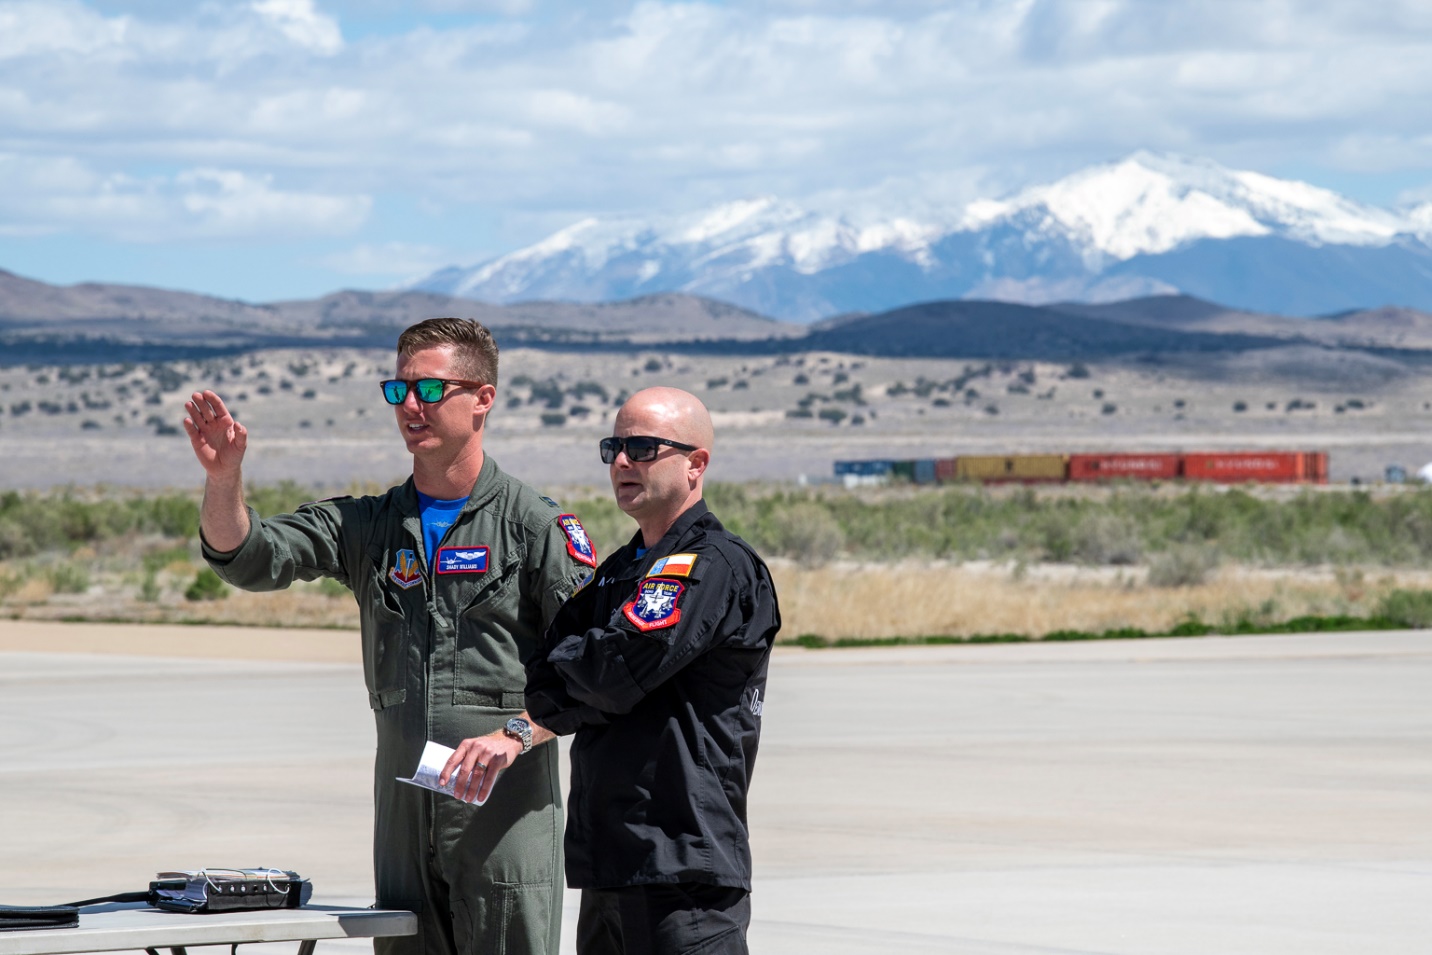 April 23, 2020 - Members of the F-35A Lightning II Demo Team prepare before a practice flyover at Dugway Proving Ground. Photo by Gabriel Archer, Dugway Visual Information Specialist